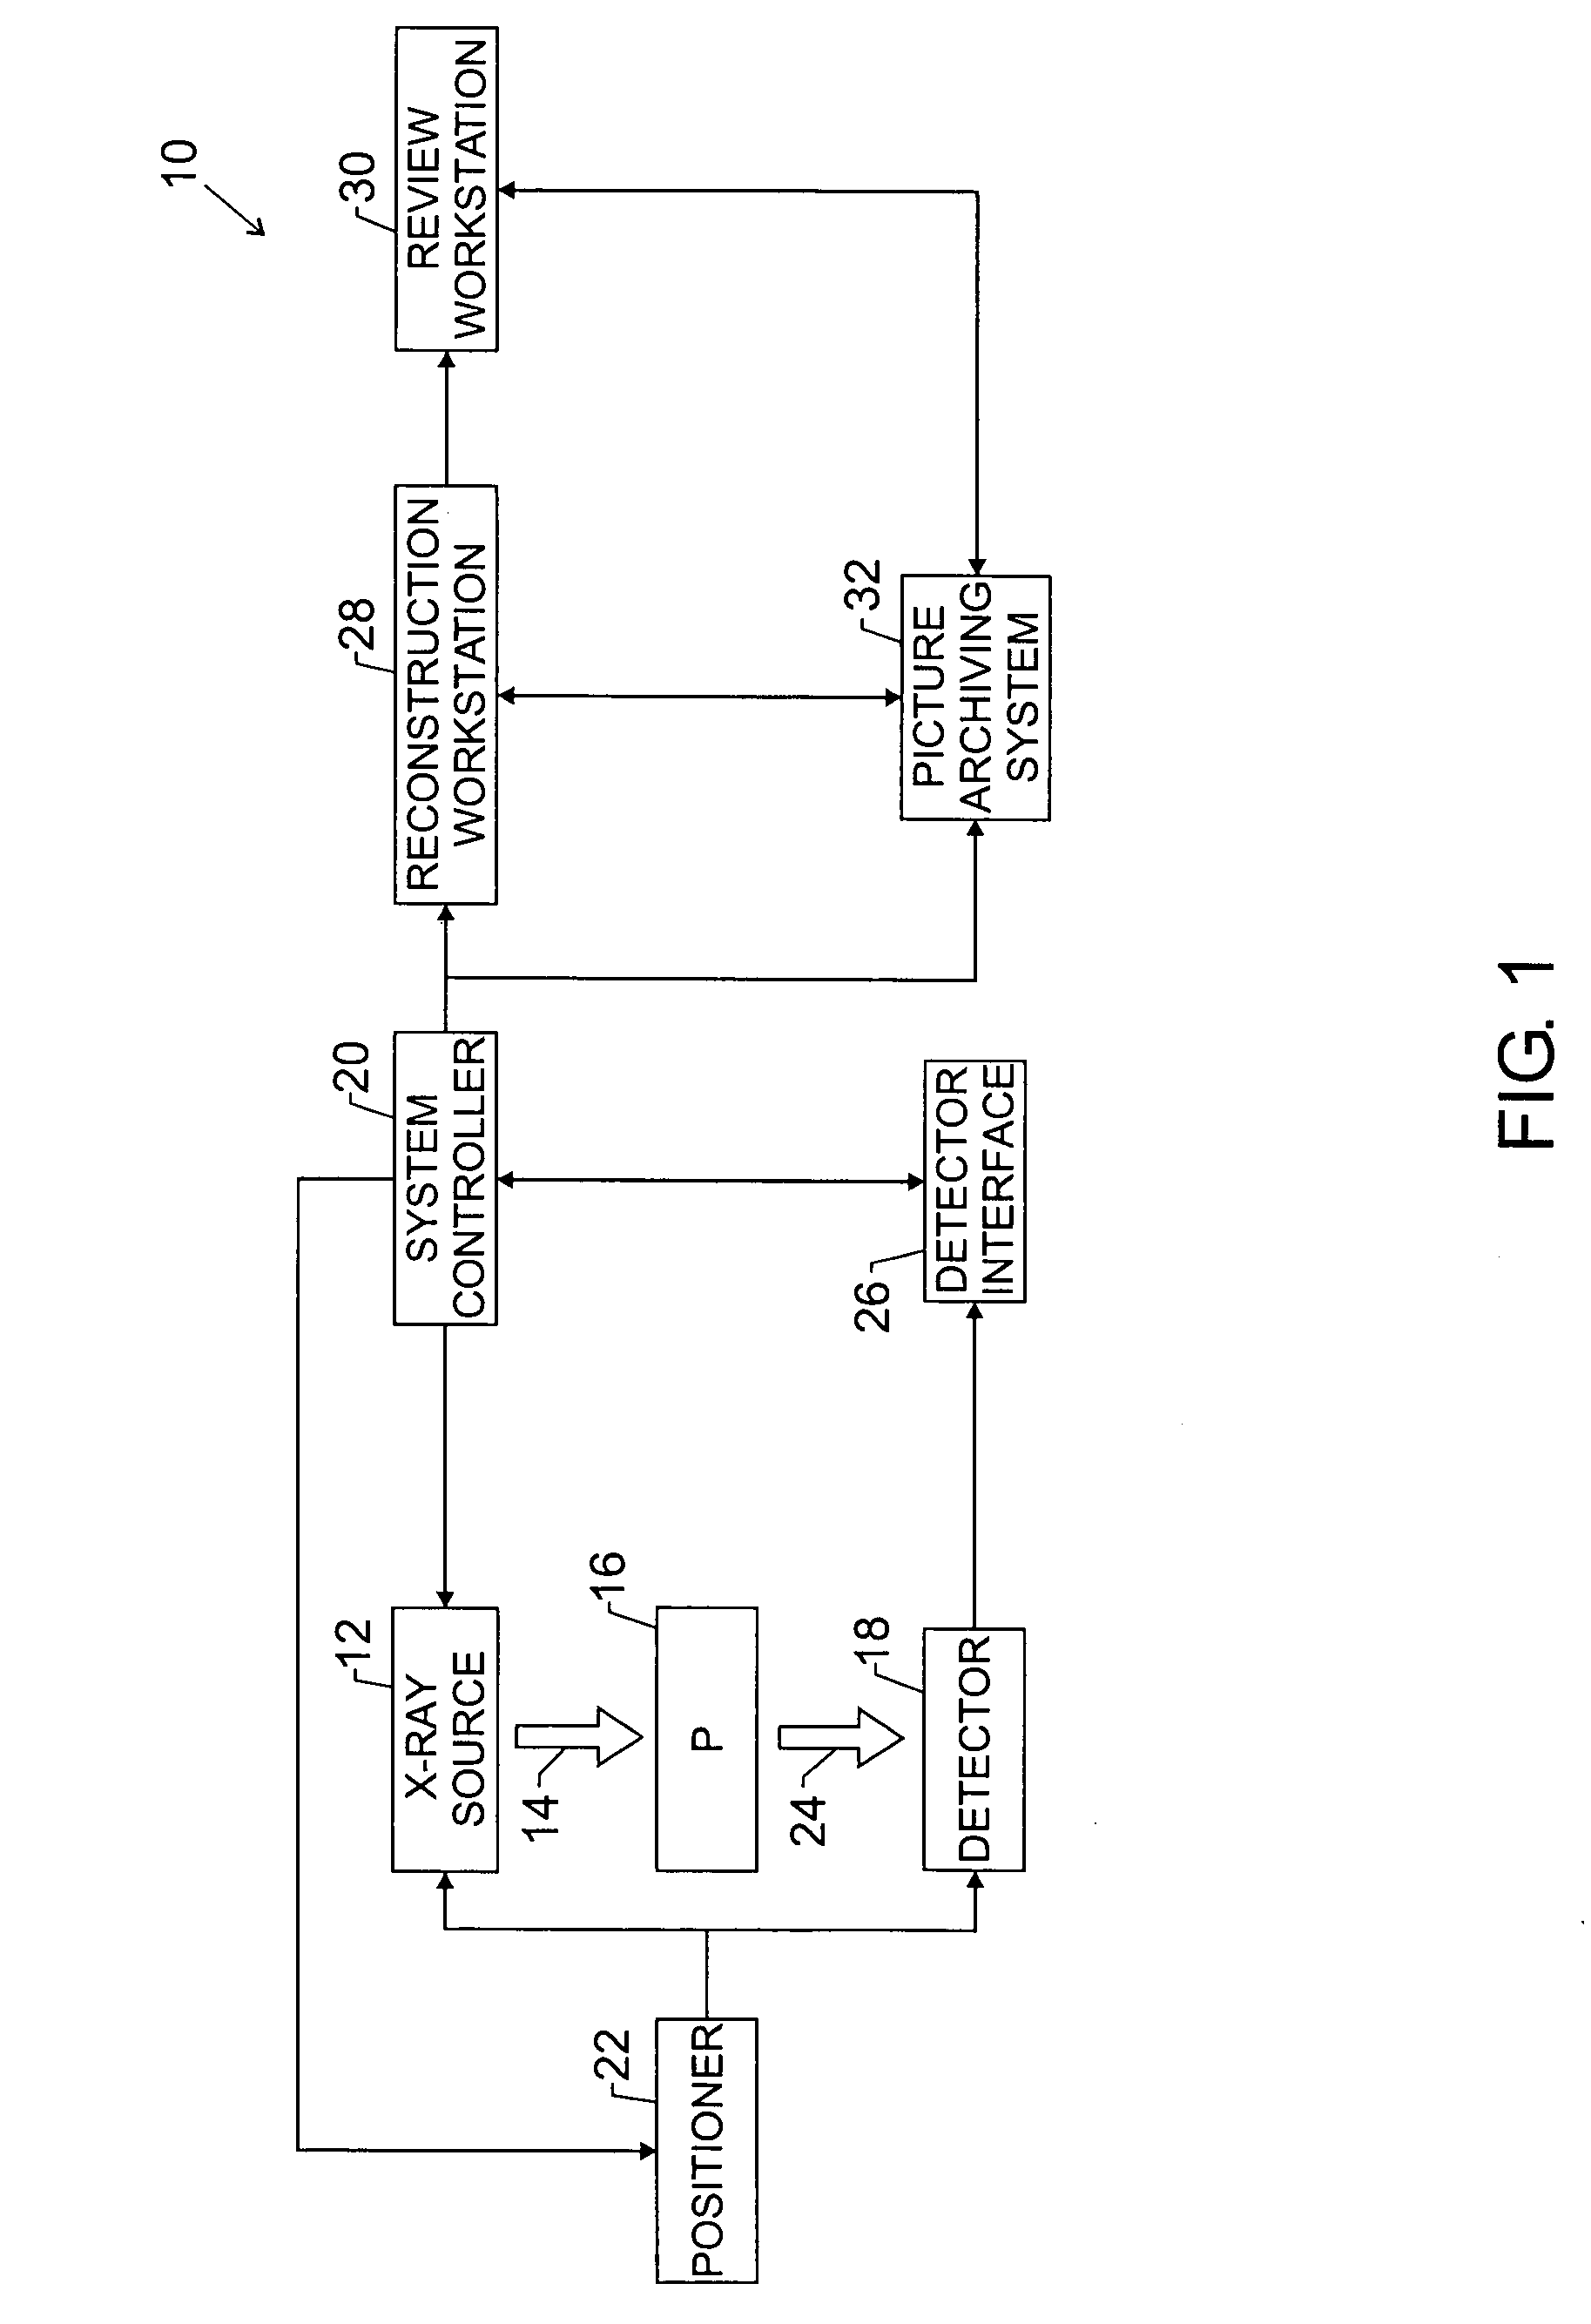 Enhanced X-ray imaging system and method